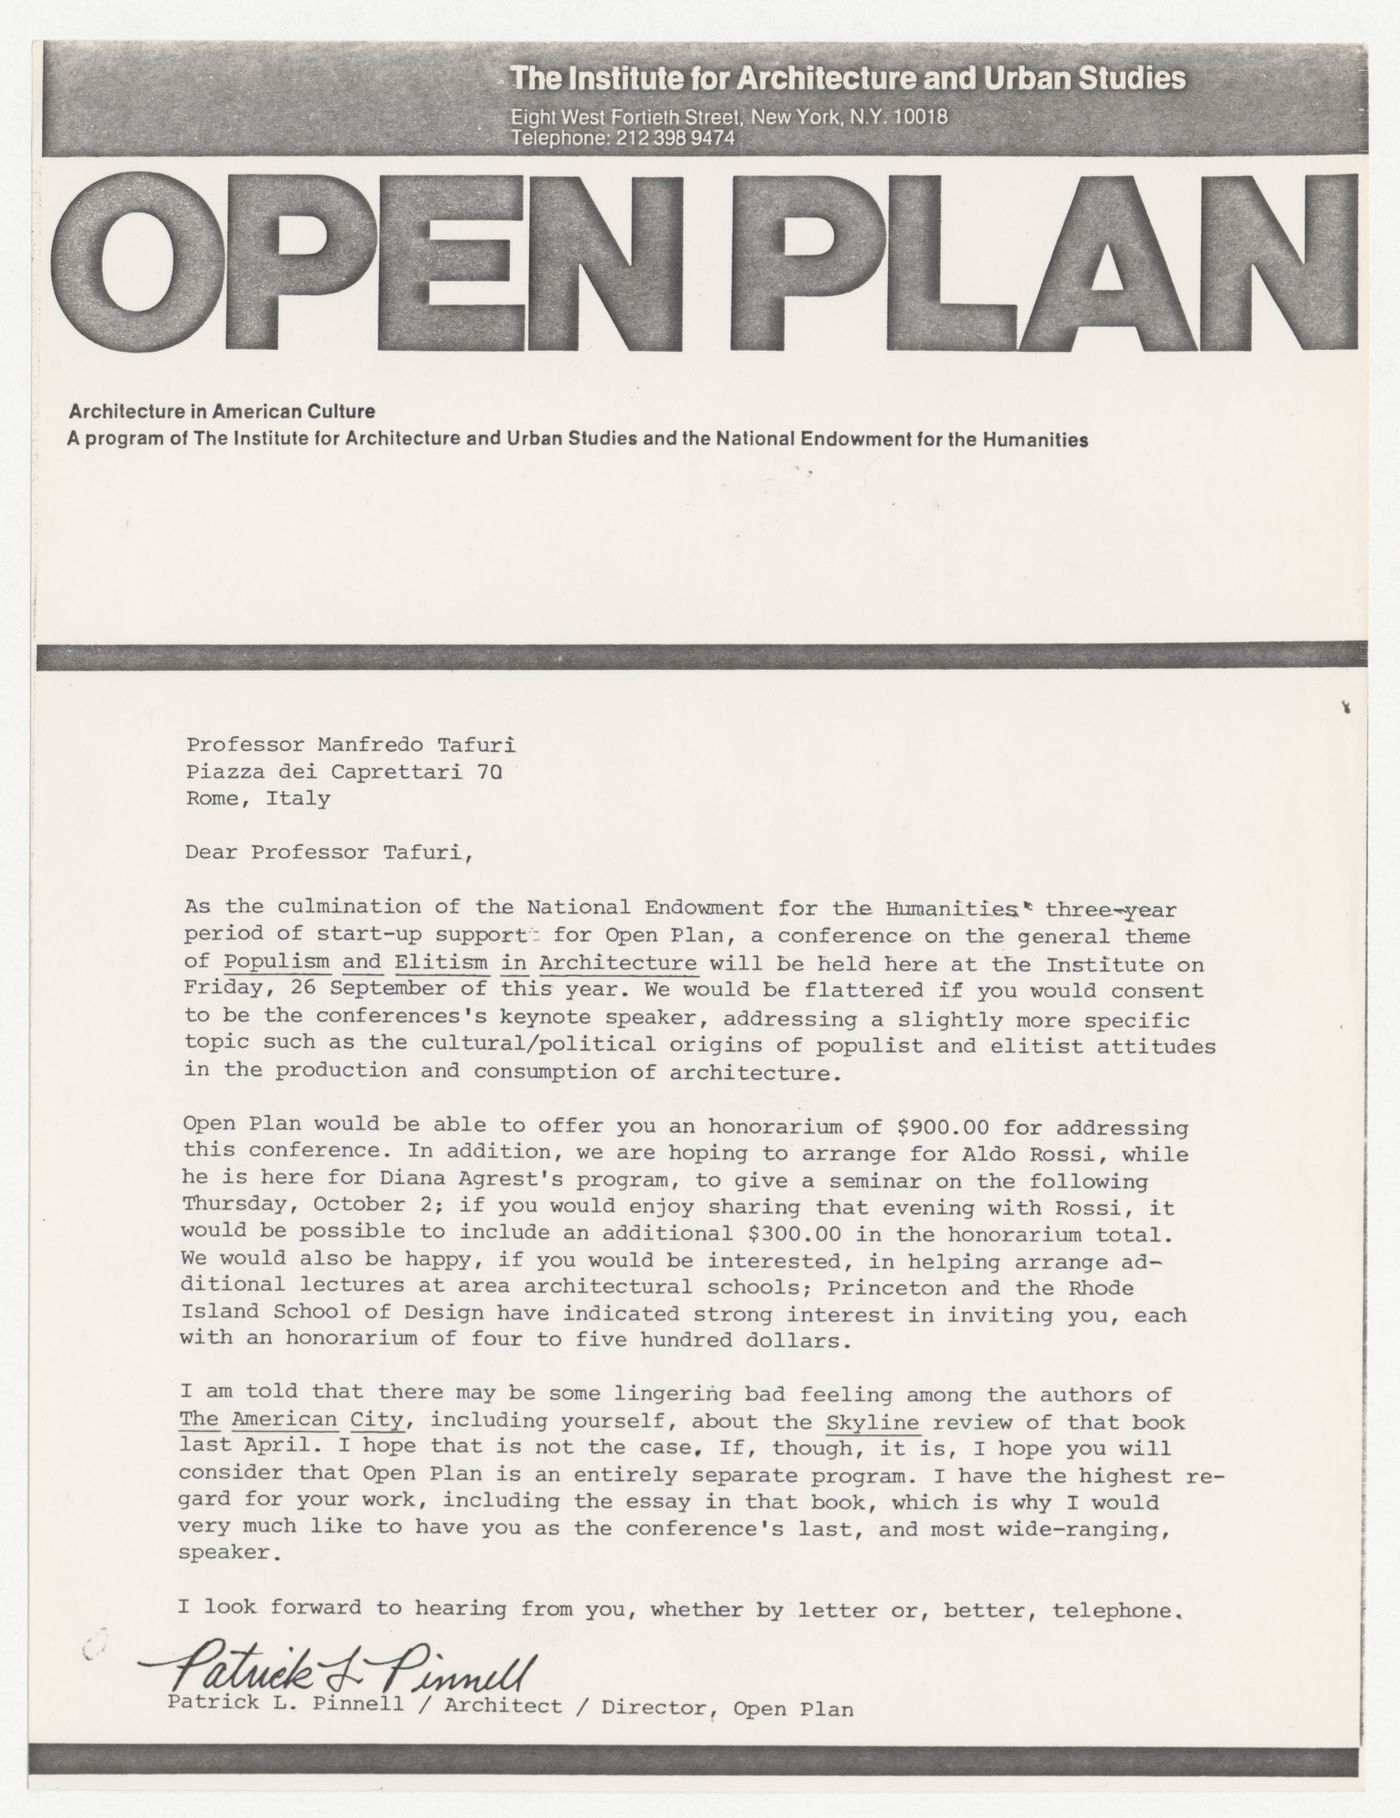 Letter from Patrick Pinnell to Manfredo Tafuri inviting Tafuri to be the keynote speaker at Open Plan